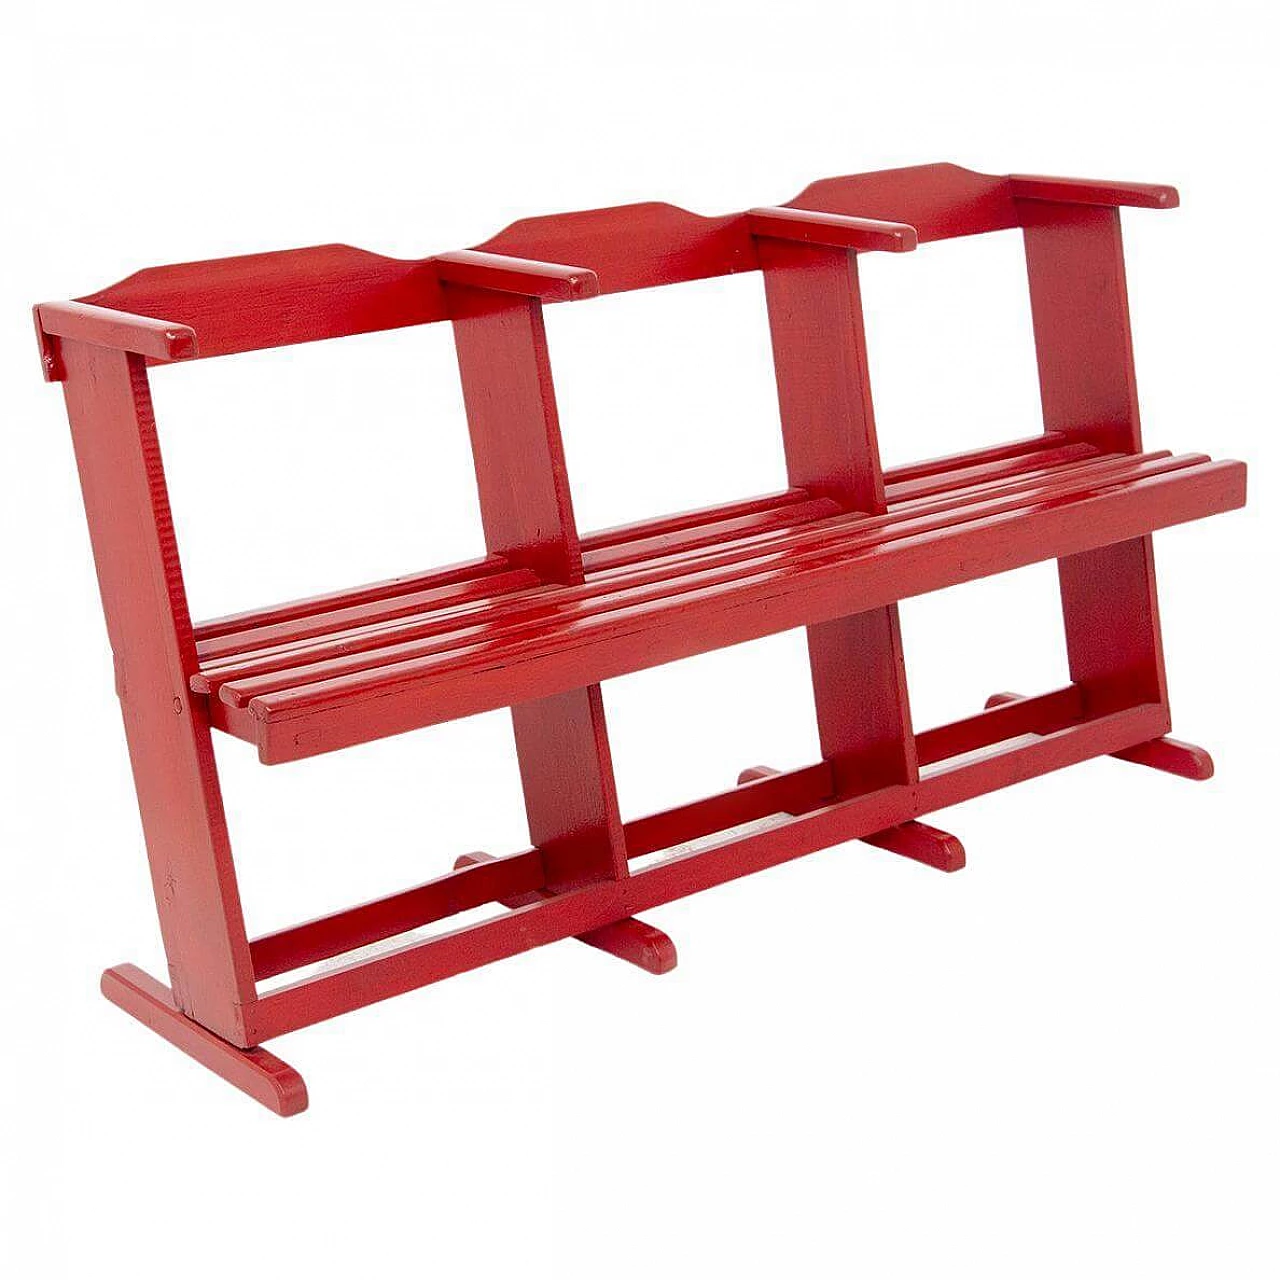 Red lacquered wooden bench, 1930s 1444707